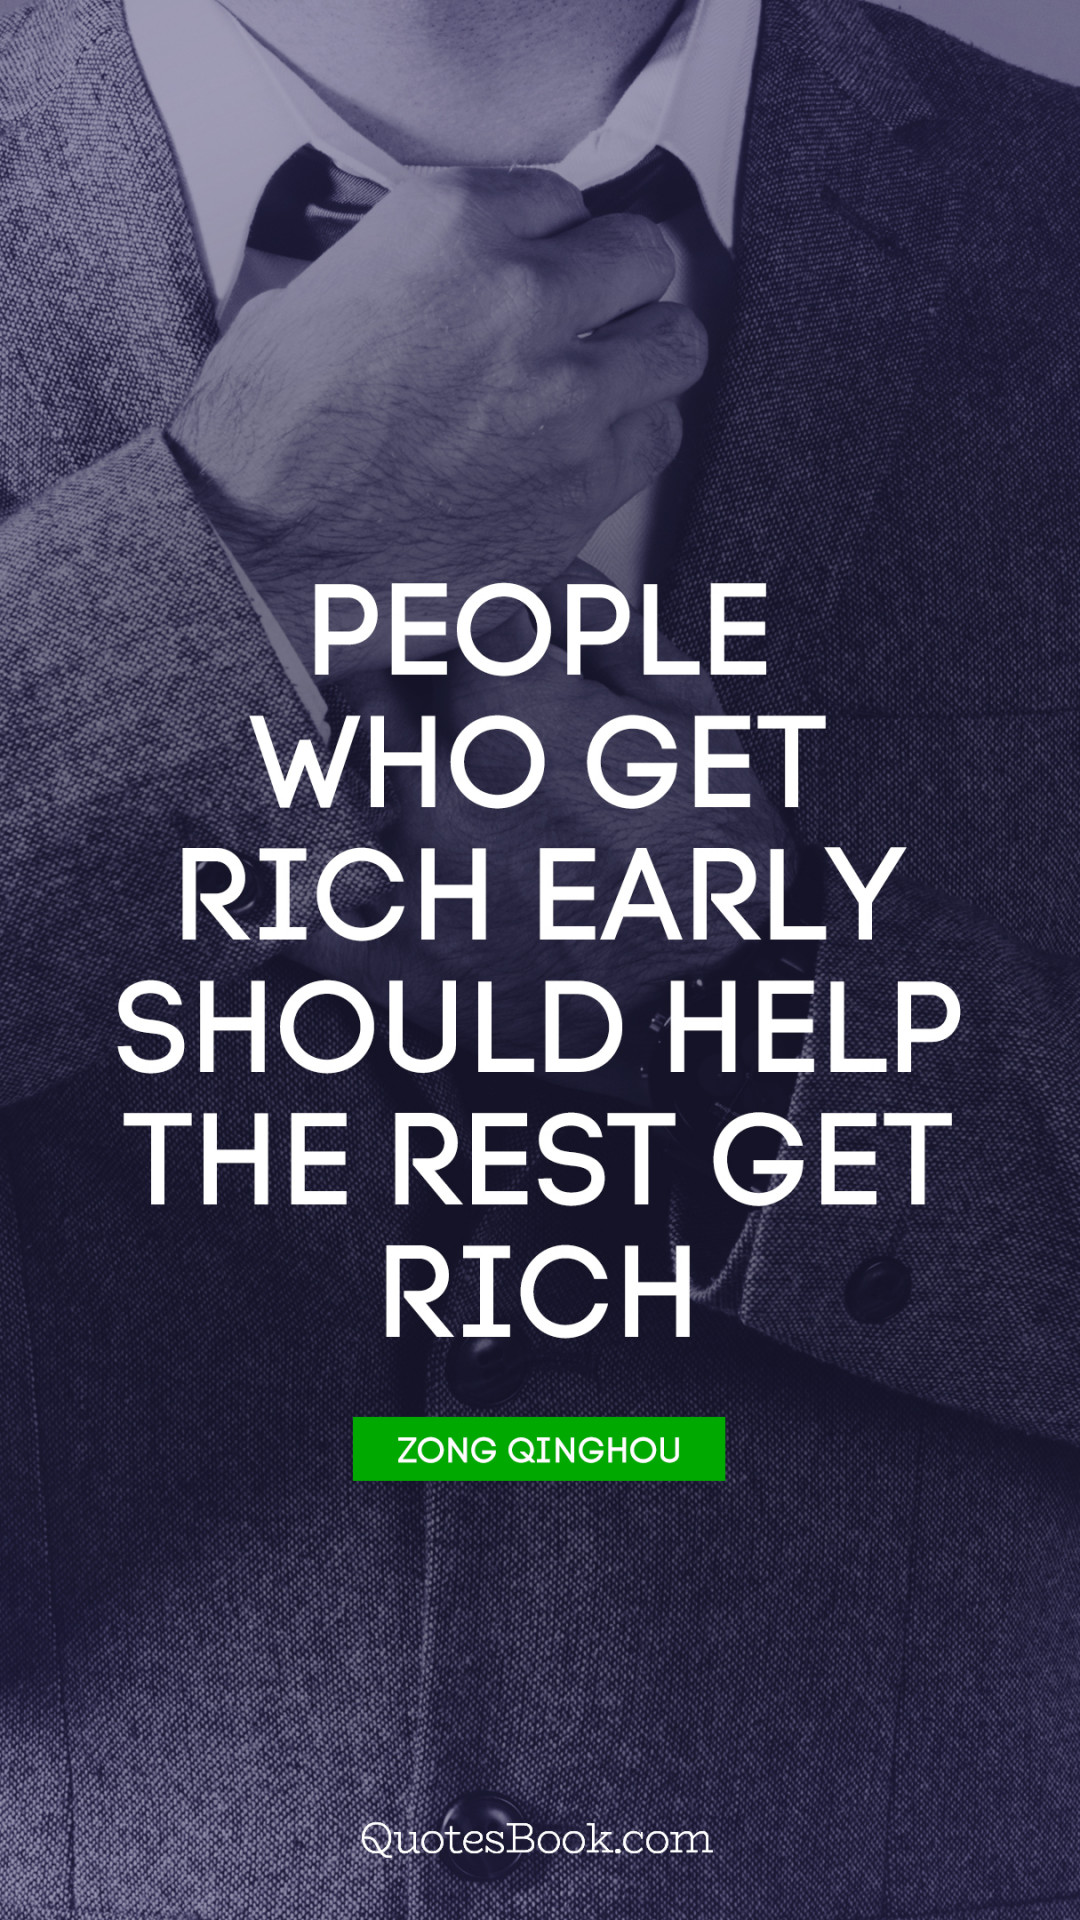 People who get rich early should help the rest get rich. - Quote by